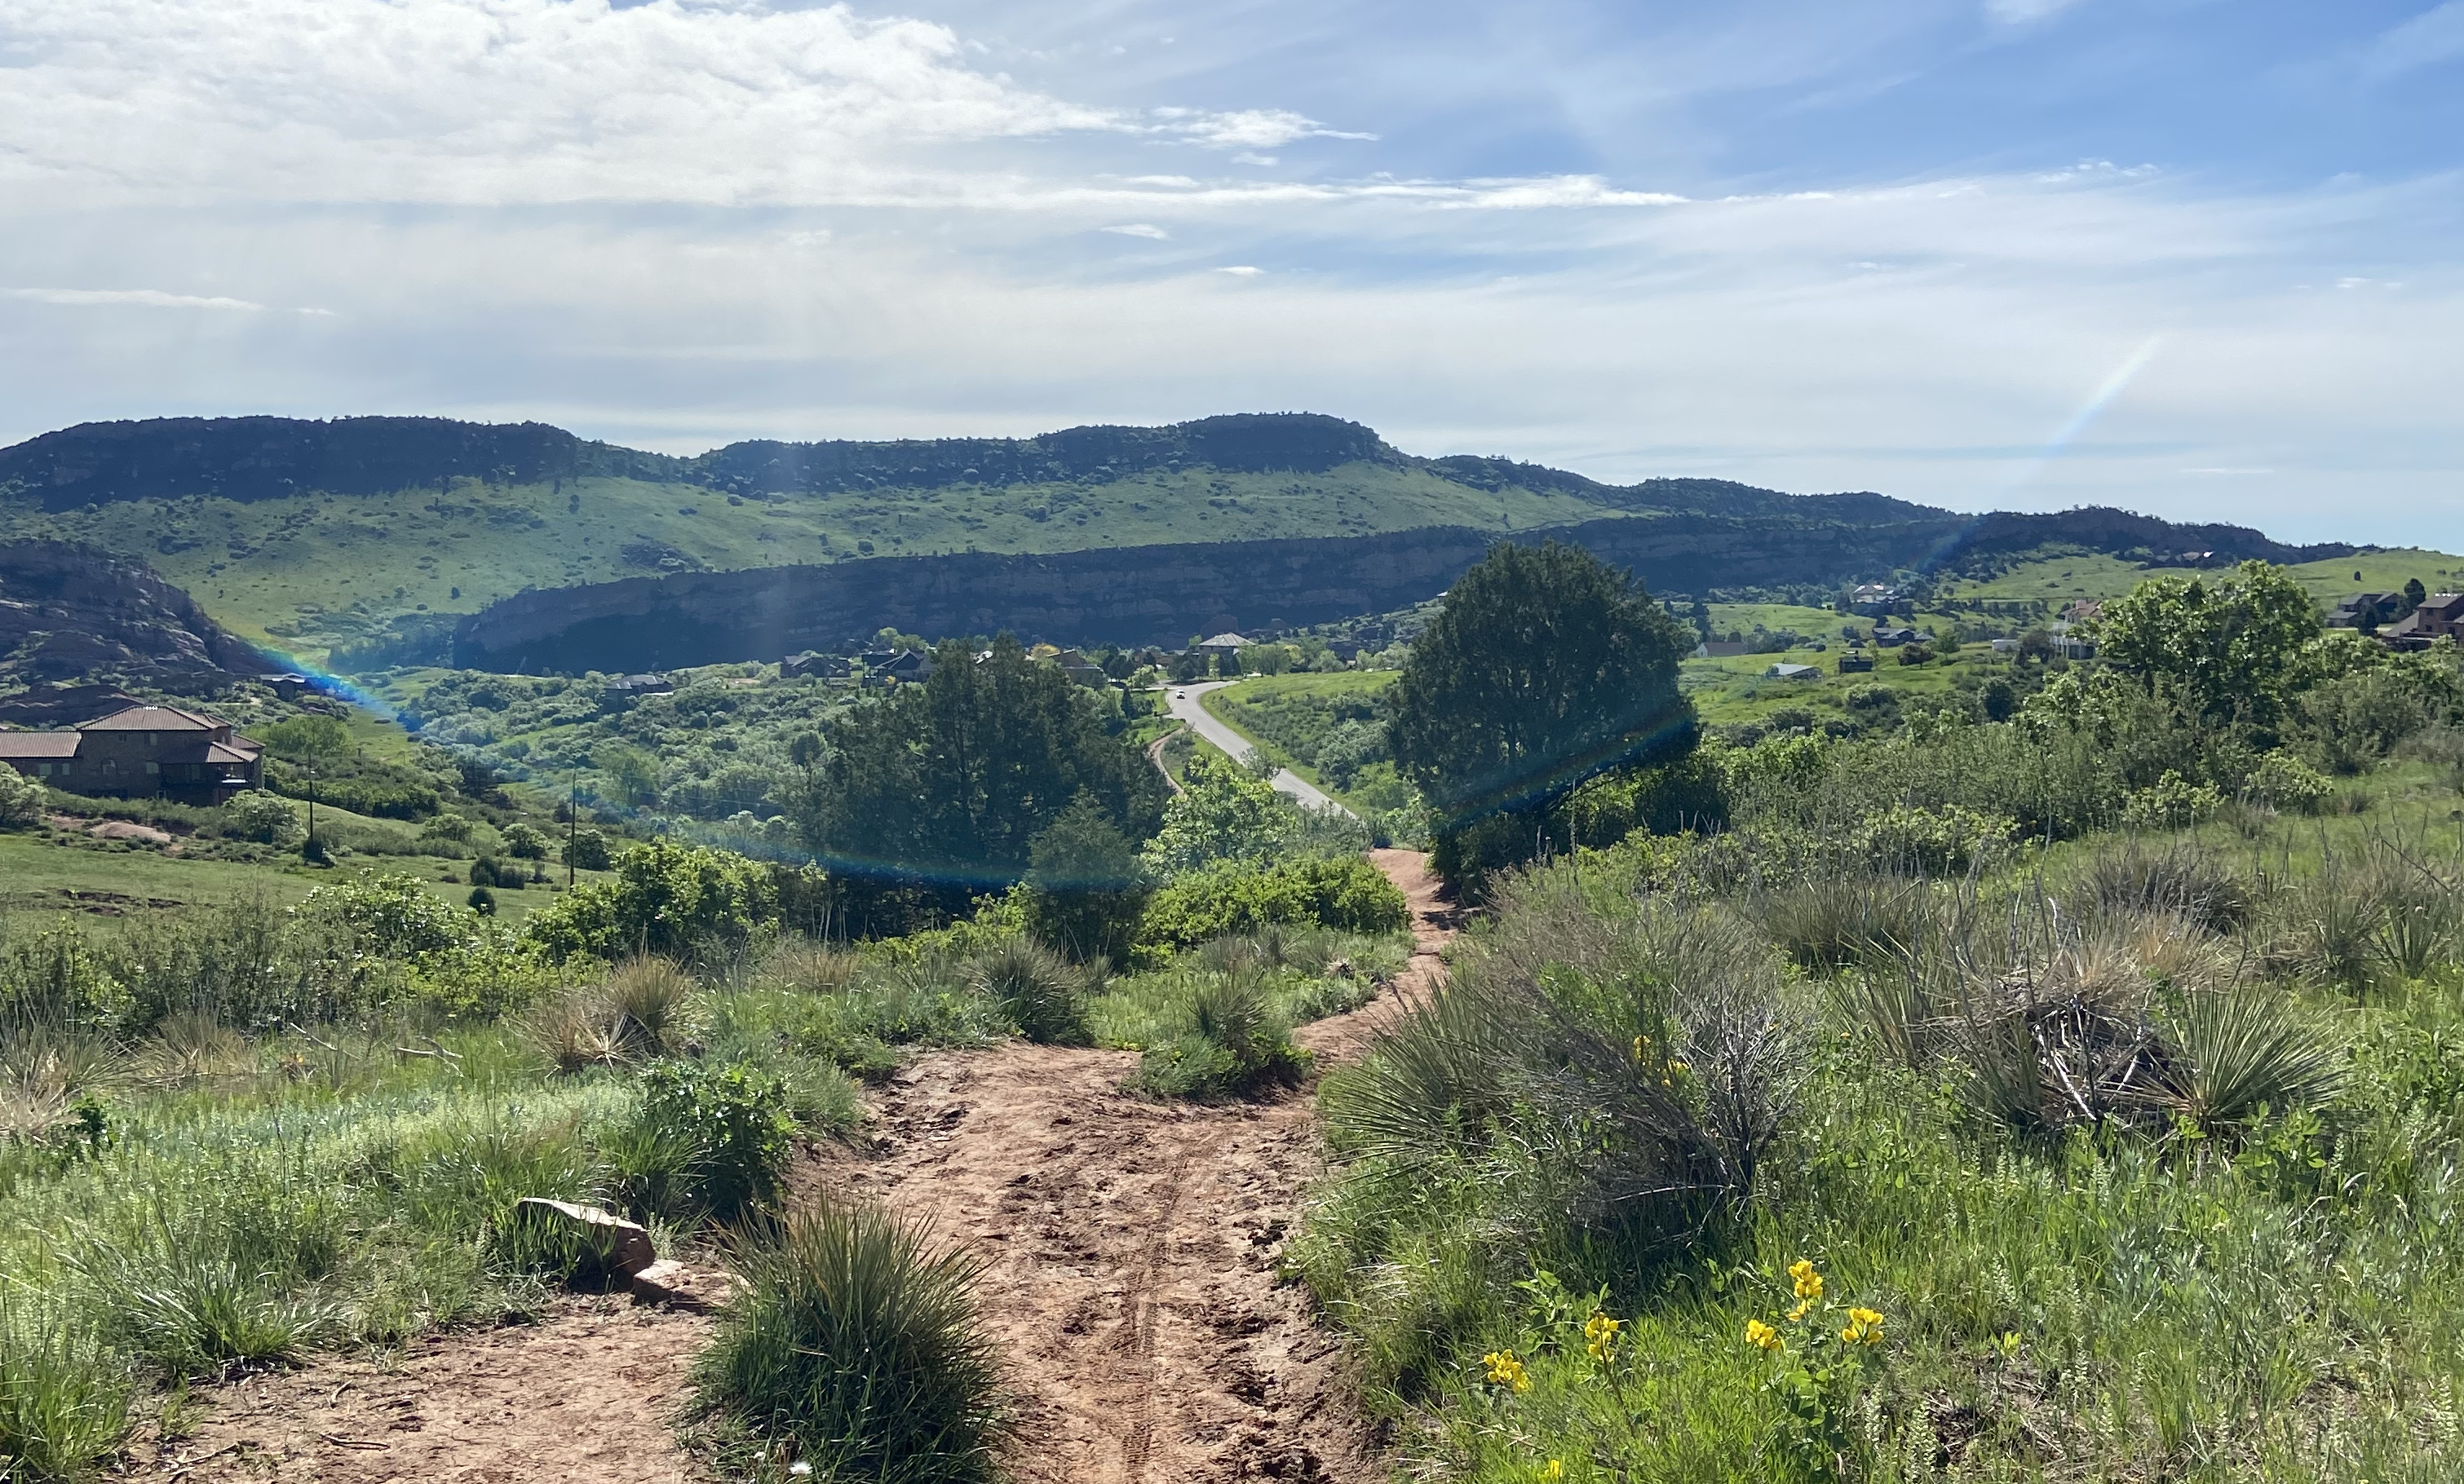 A photograph of a colorado trail surrounded in green hills and the sun shining in a blue sky.